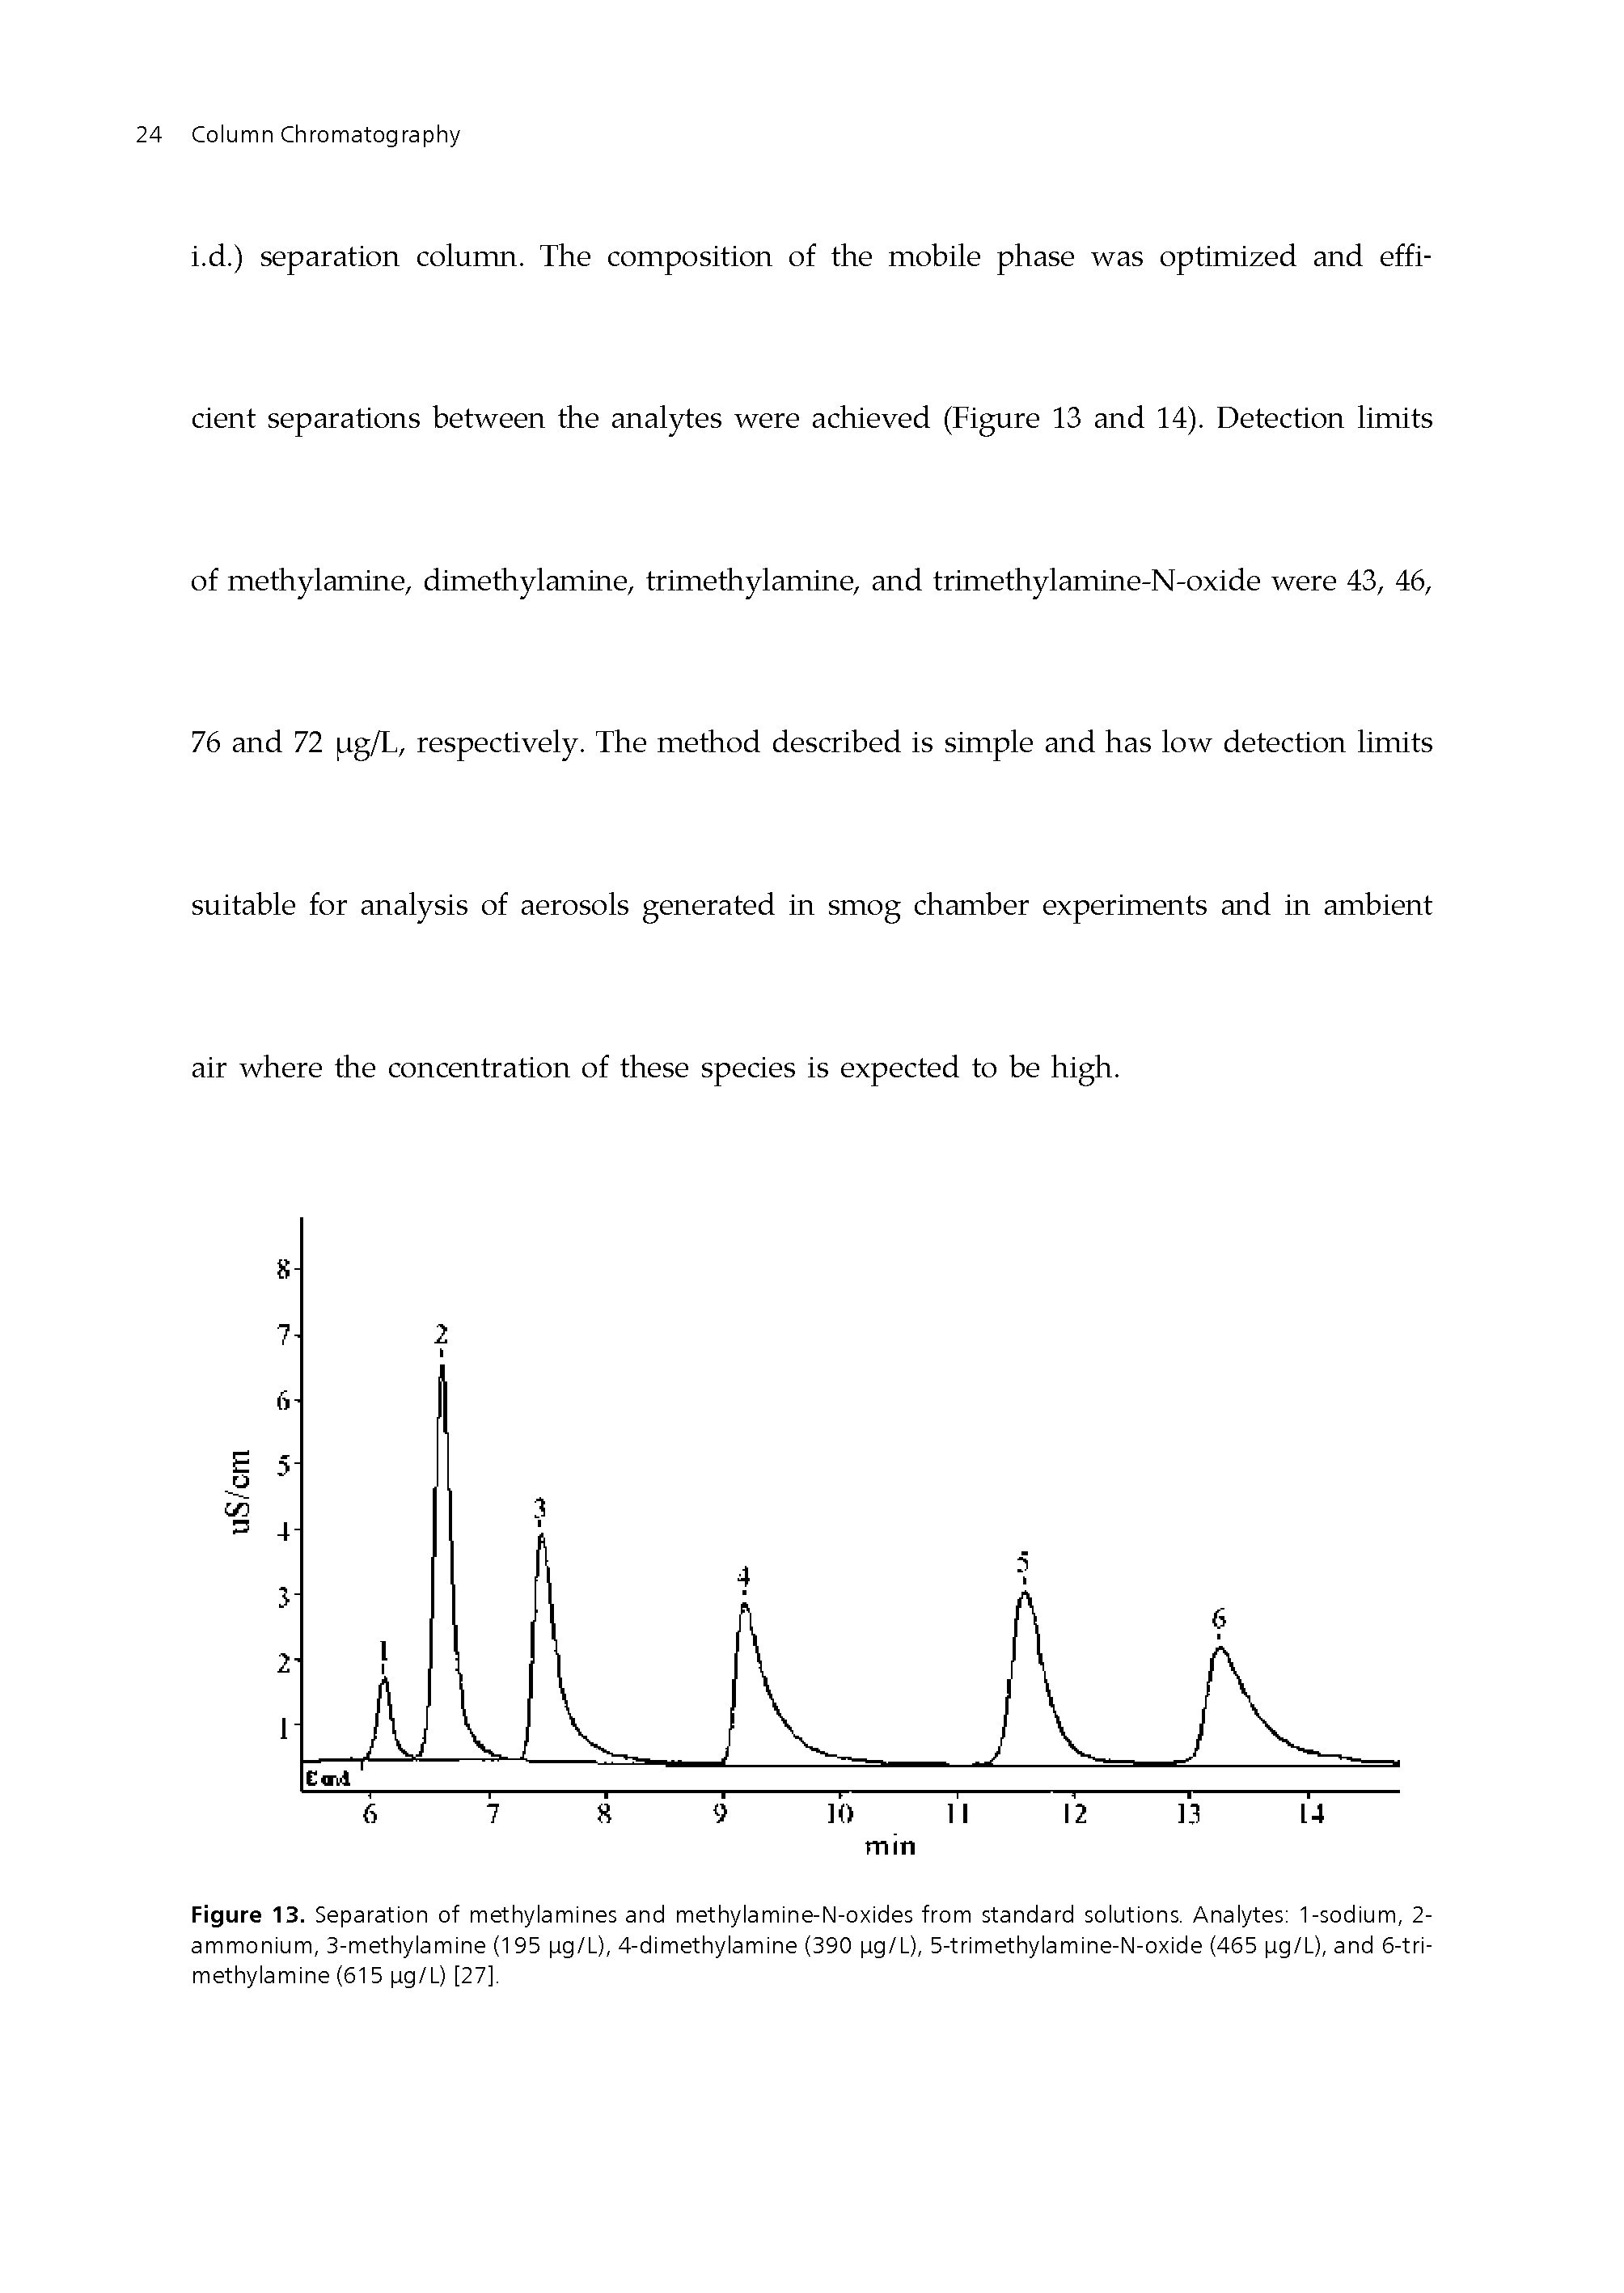 Figure 13. Separation of methylamines and methylamine-N-oxides from standard solutions. Analytes 1-sodium, 2-ammonium, 3-methylamine (195 pg/L), 4-dimethylamine (390 pg/L), 5-trimethylamine-N-oxide (465 pg/L), and 6-tri-methylamine (615 pg/L) [27],...